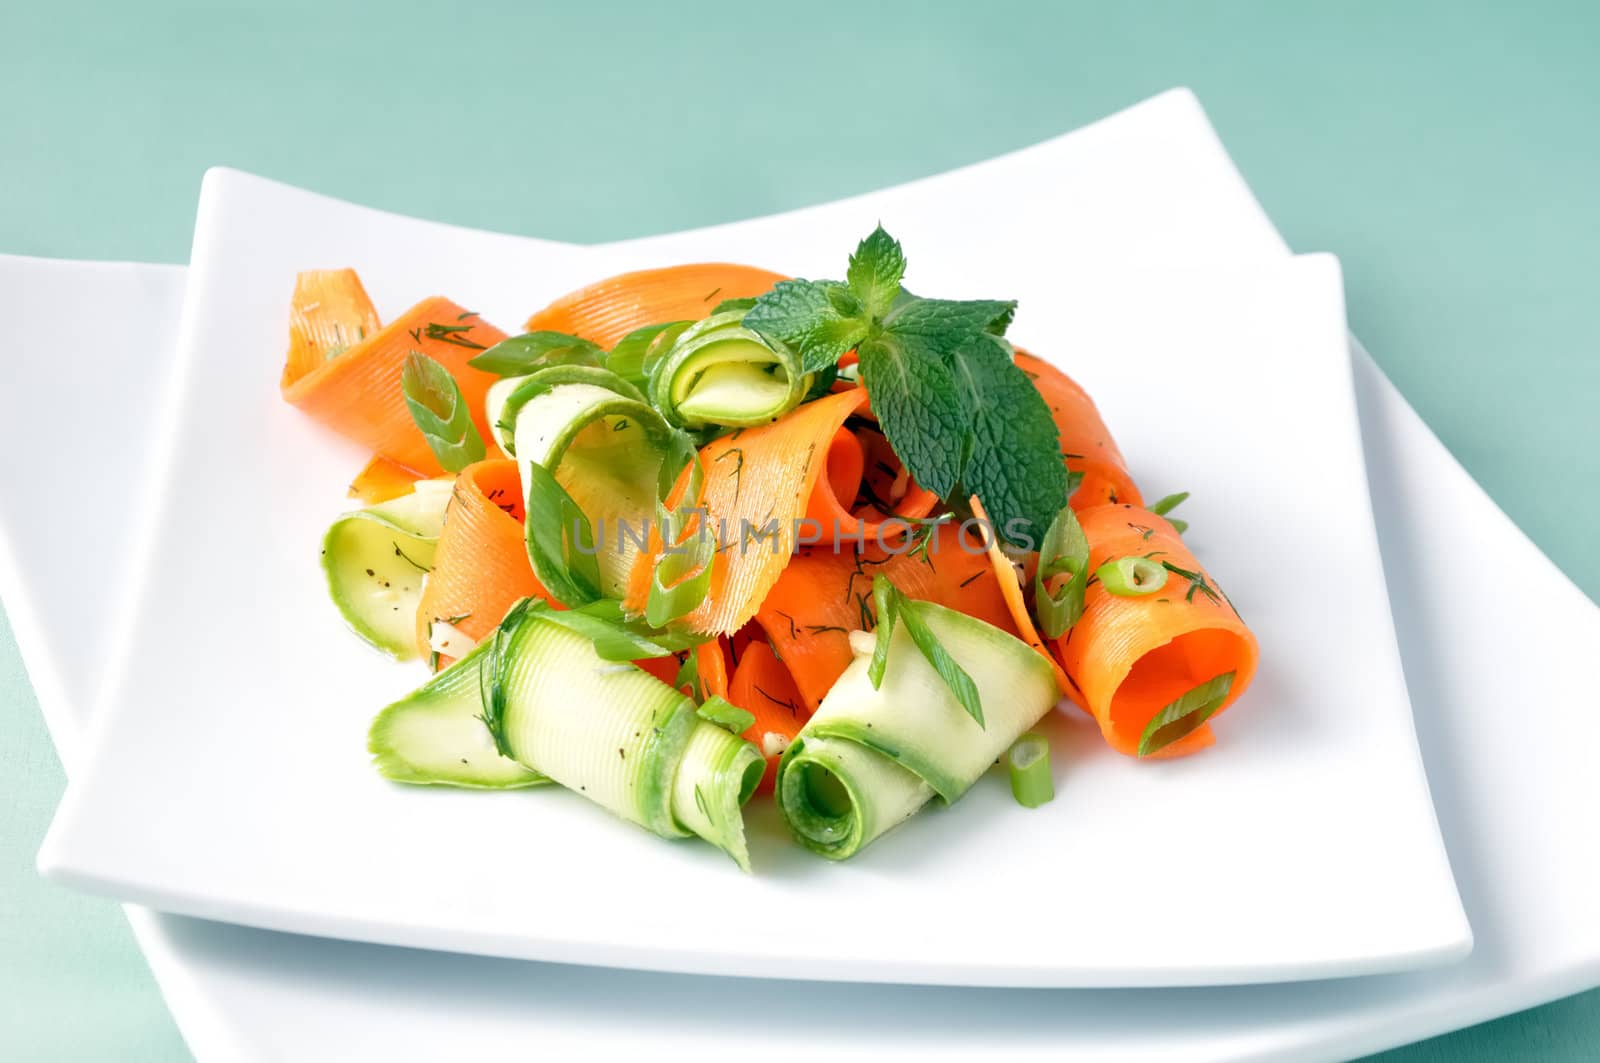   Zucchini salad with carrots by Apolonia